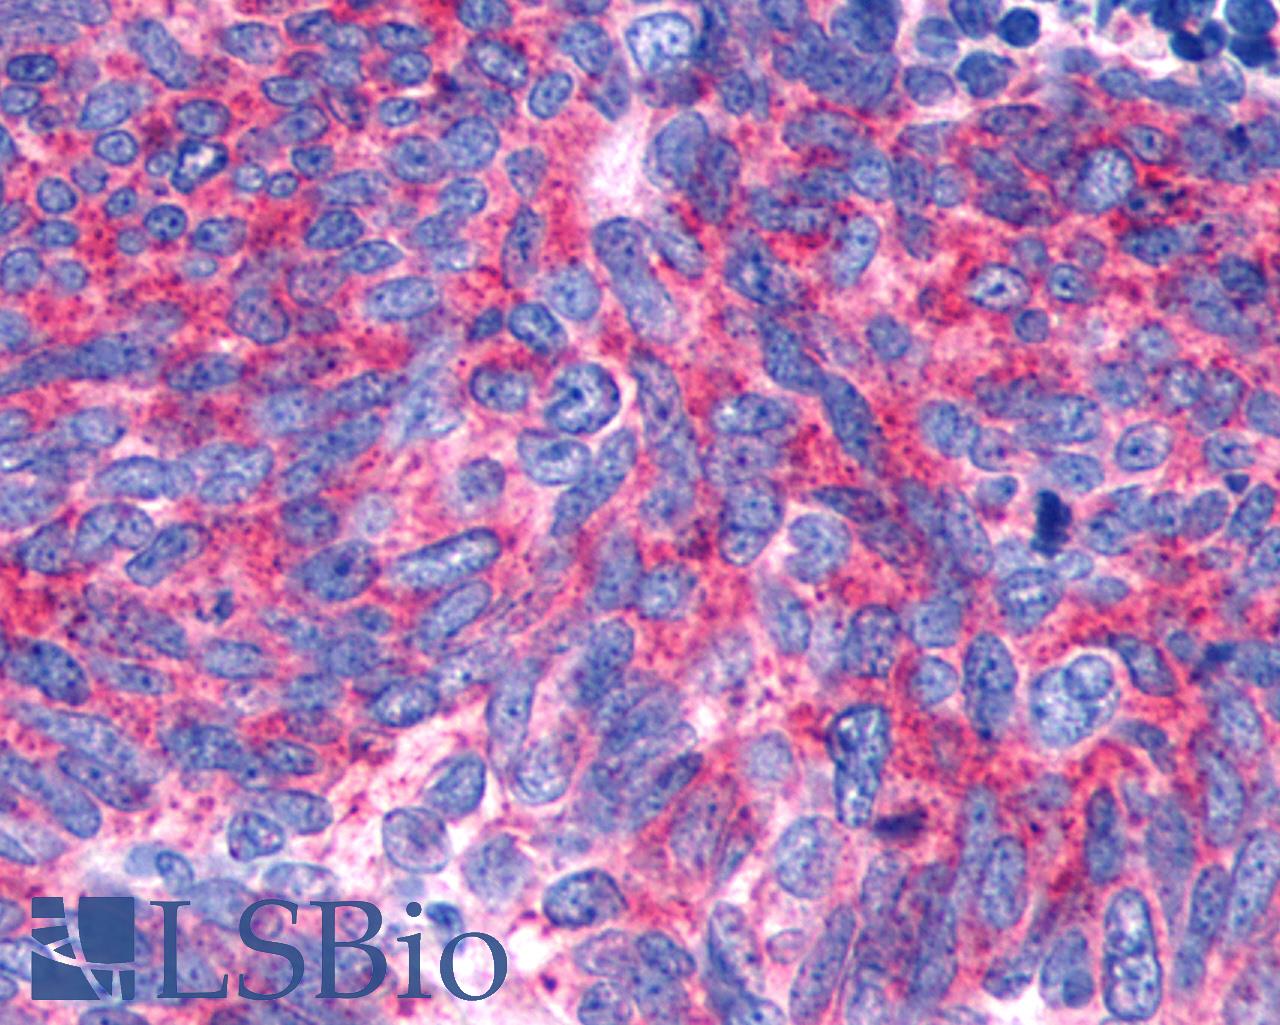 GPR146 Antibody - Anti-GPR146 antibody IHC of human Lung, Small Cell Carcinoma. Immunohistochemistry of formalin-fixed, paraffin-embedded tissue after heat-induced antigen retrieval.